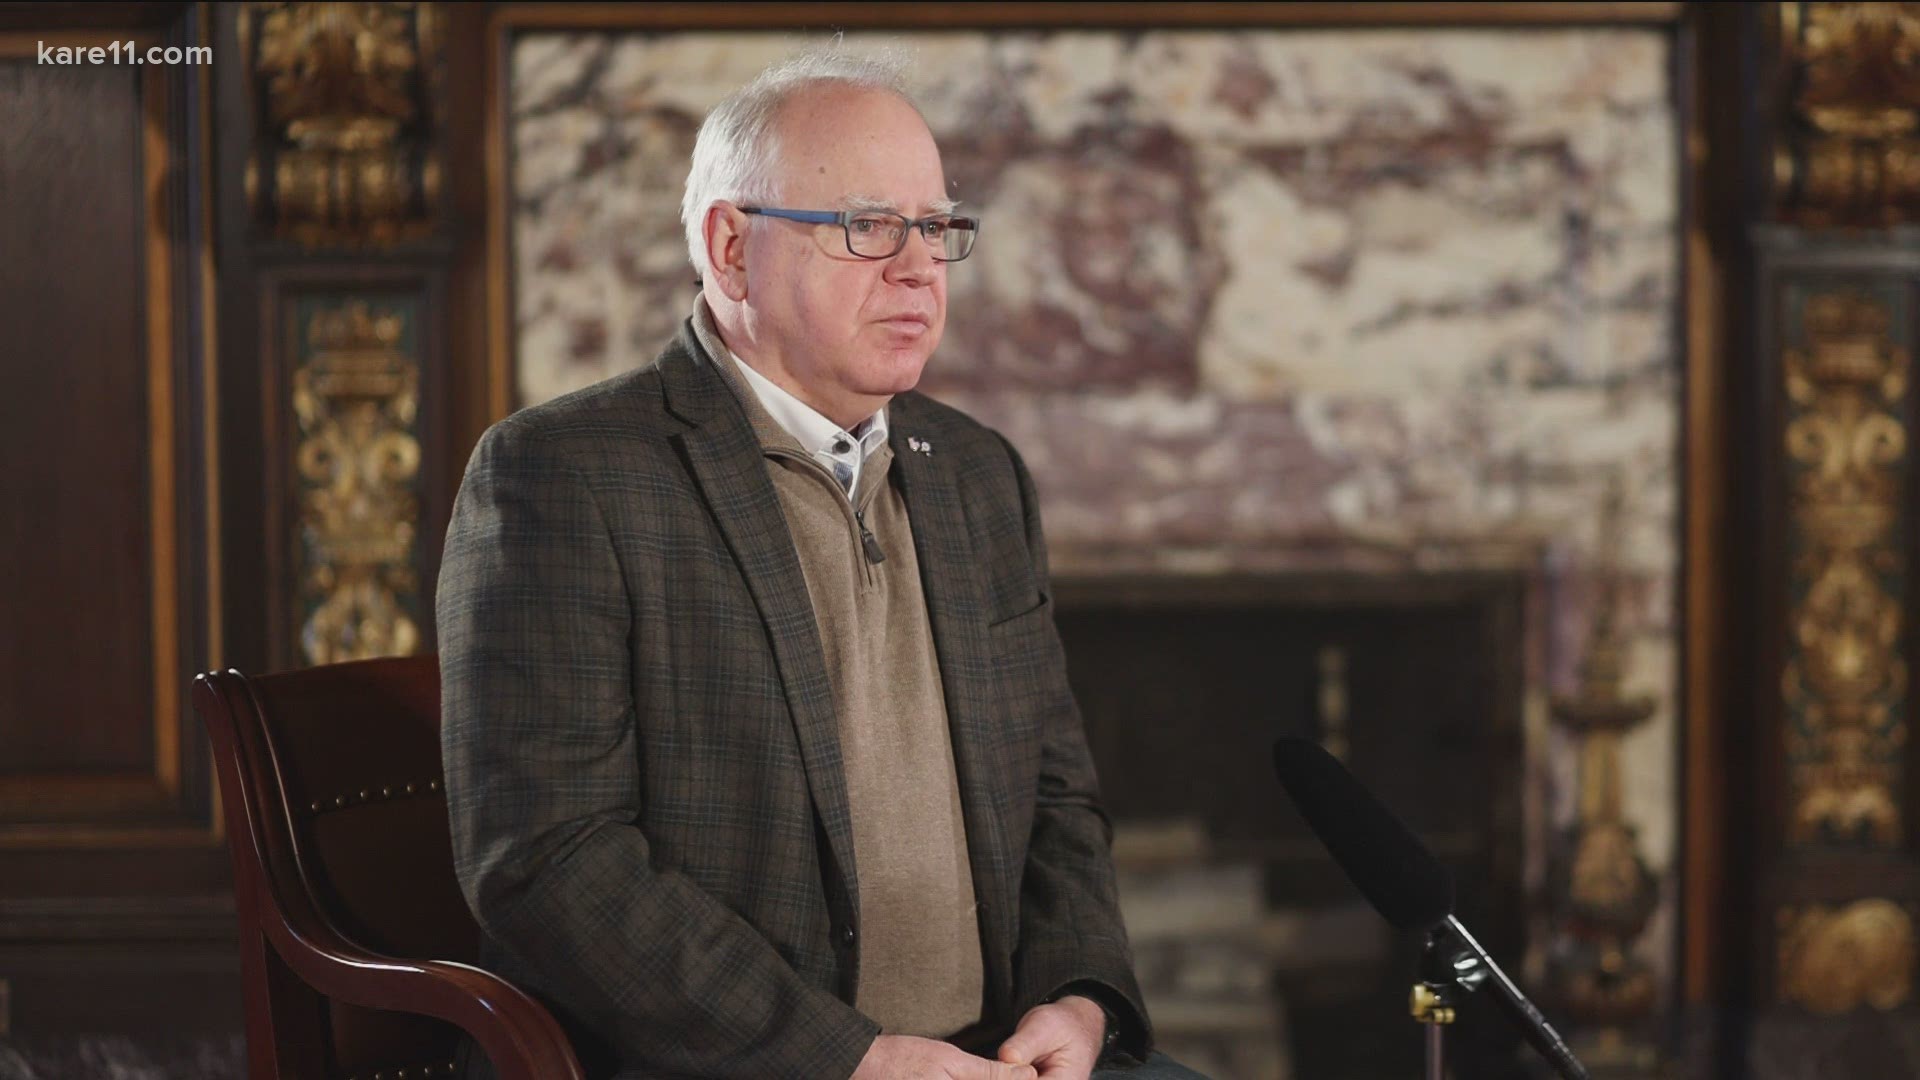 Walz sat down at a distance with KARE 11's Jana Shortal to reflect on leading Minnesota through a historic 2020 – and whether it will make him a one-term governor.